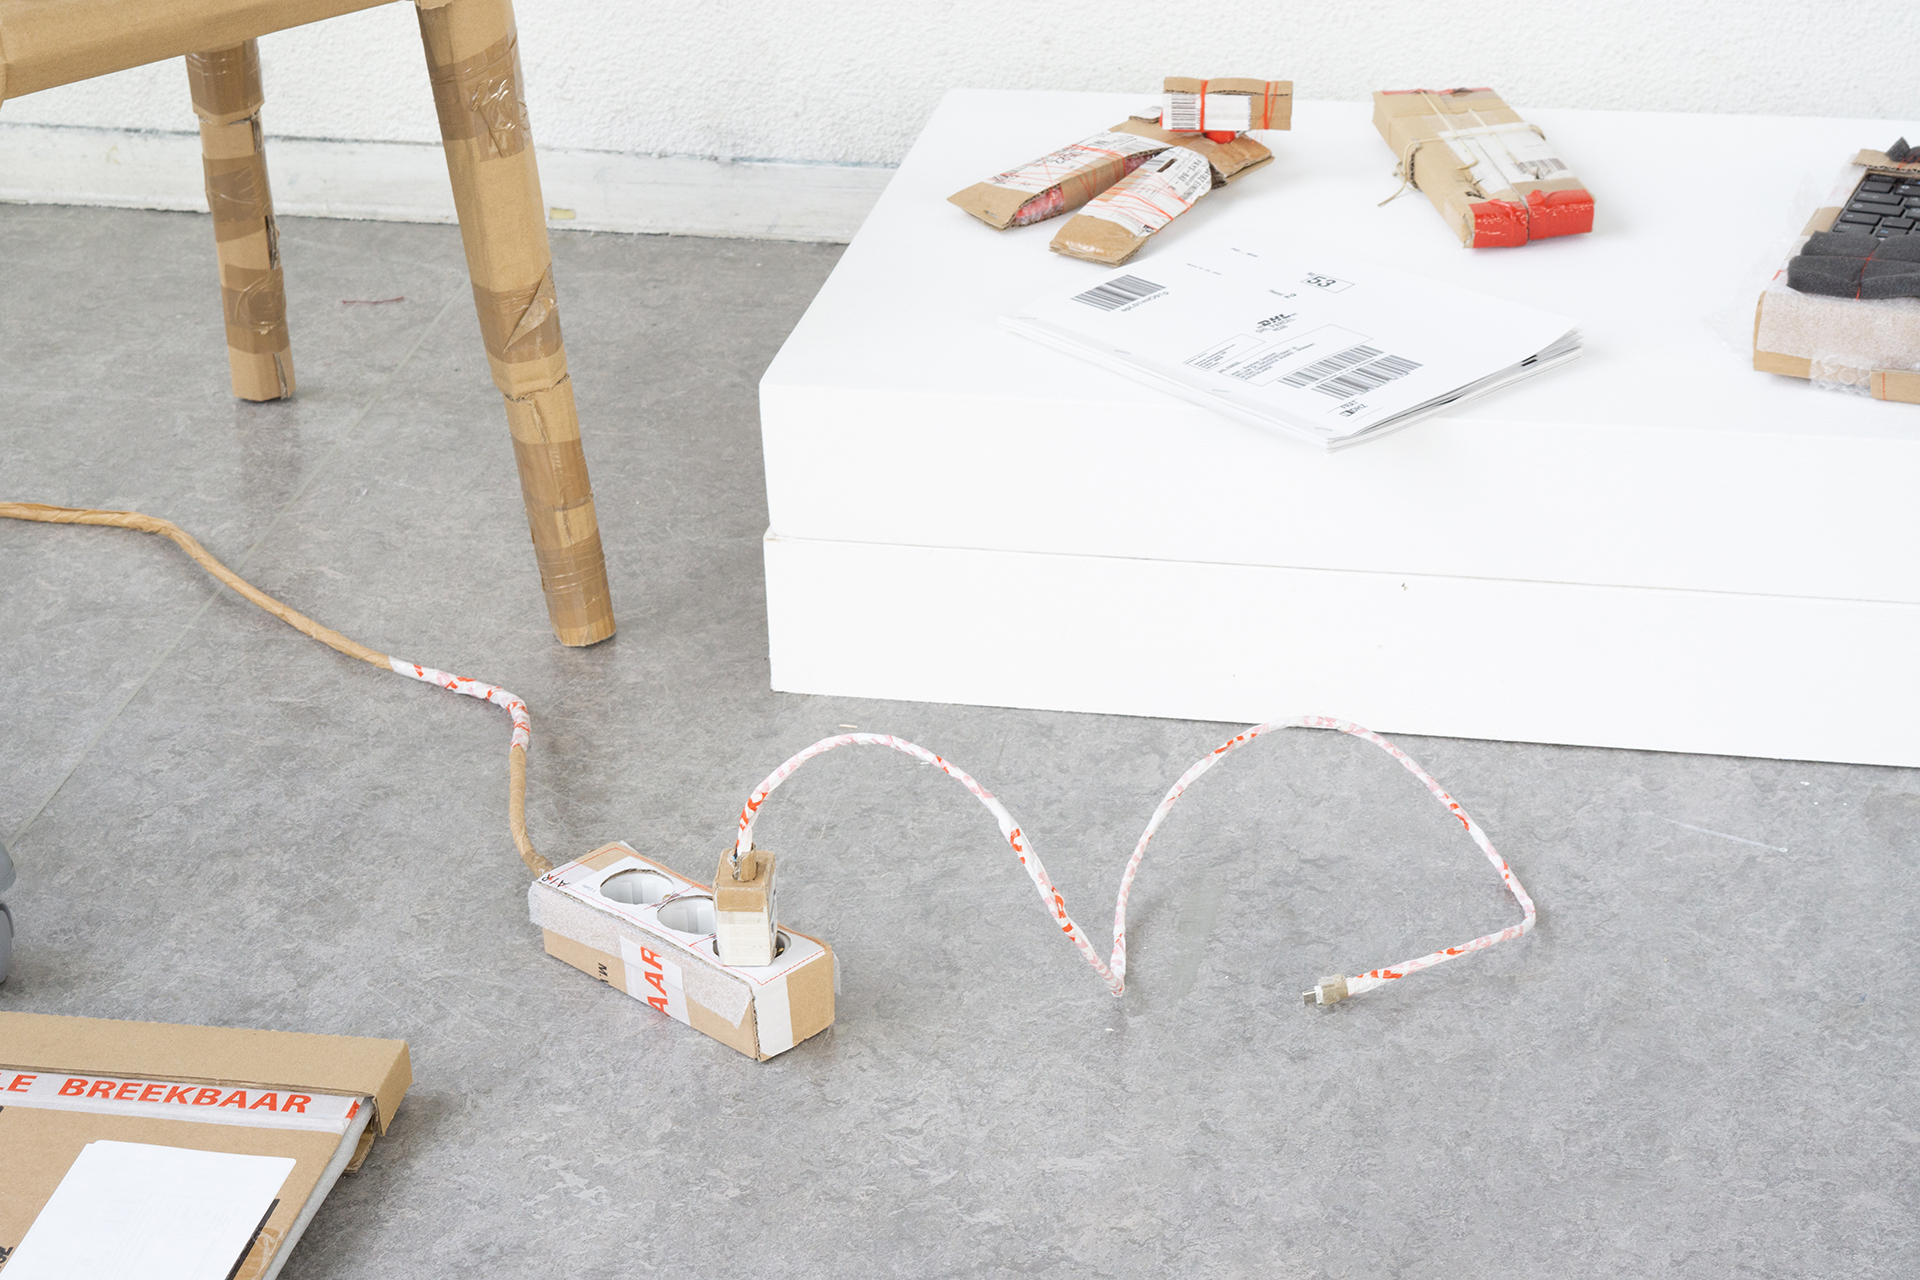 extension cord and boxes